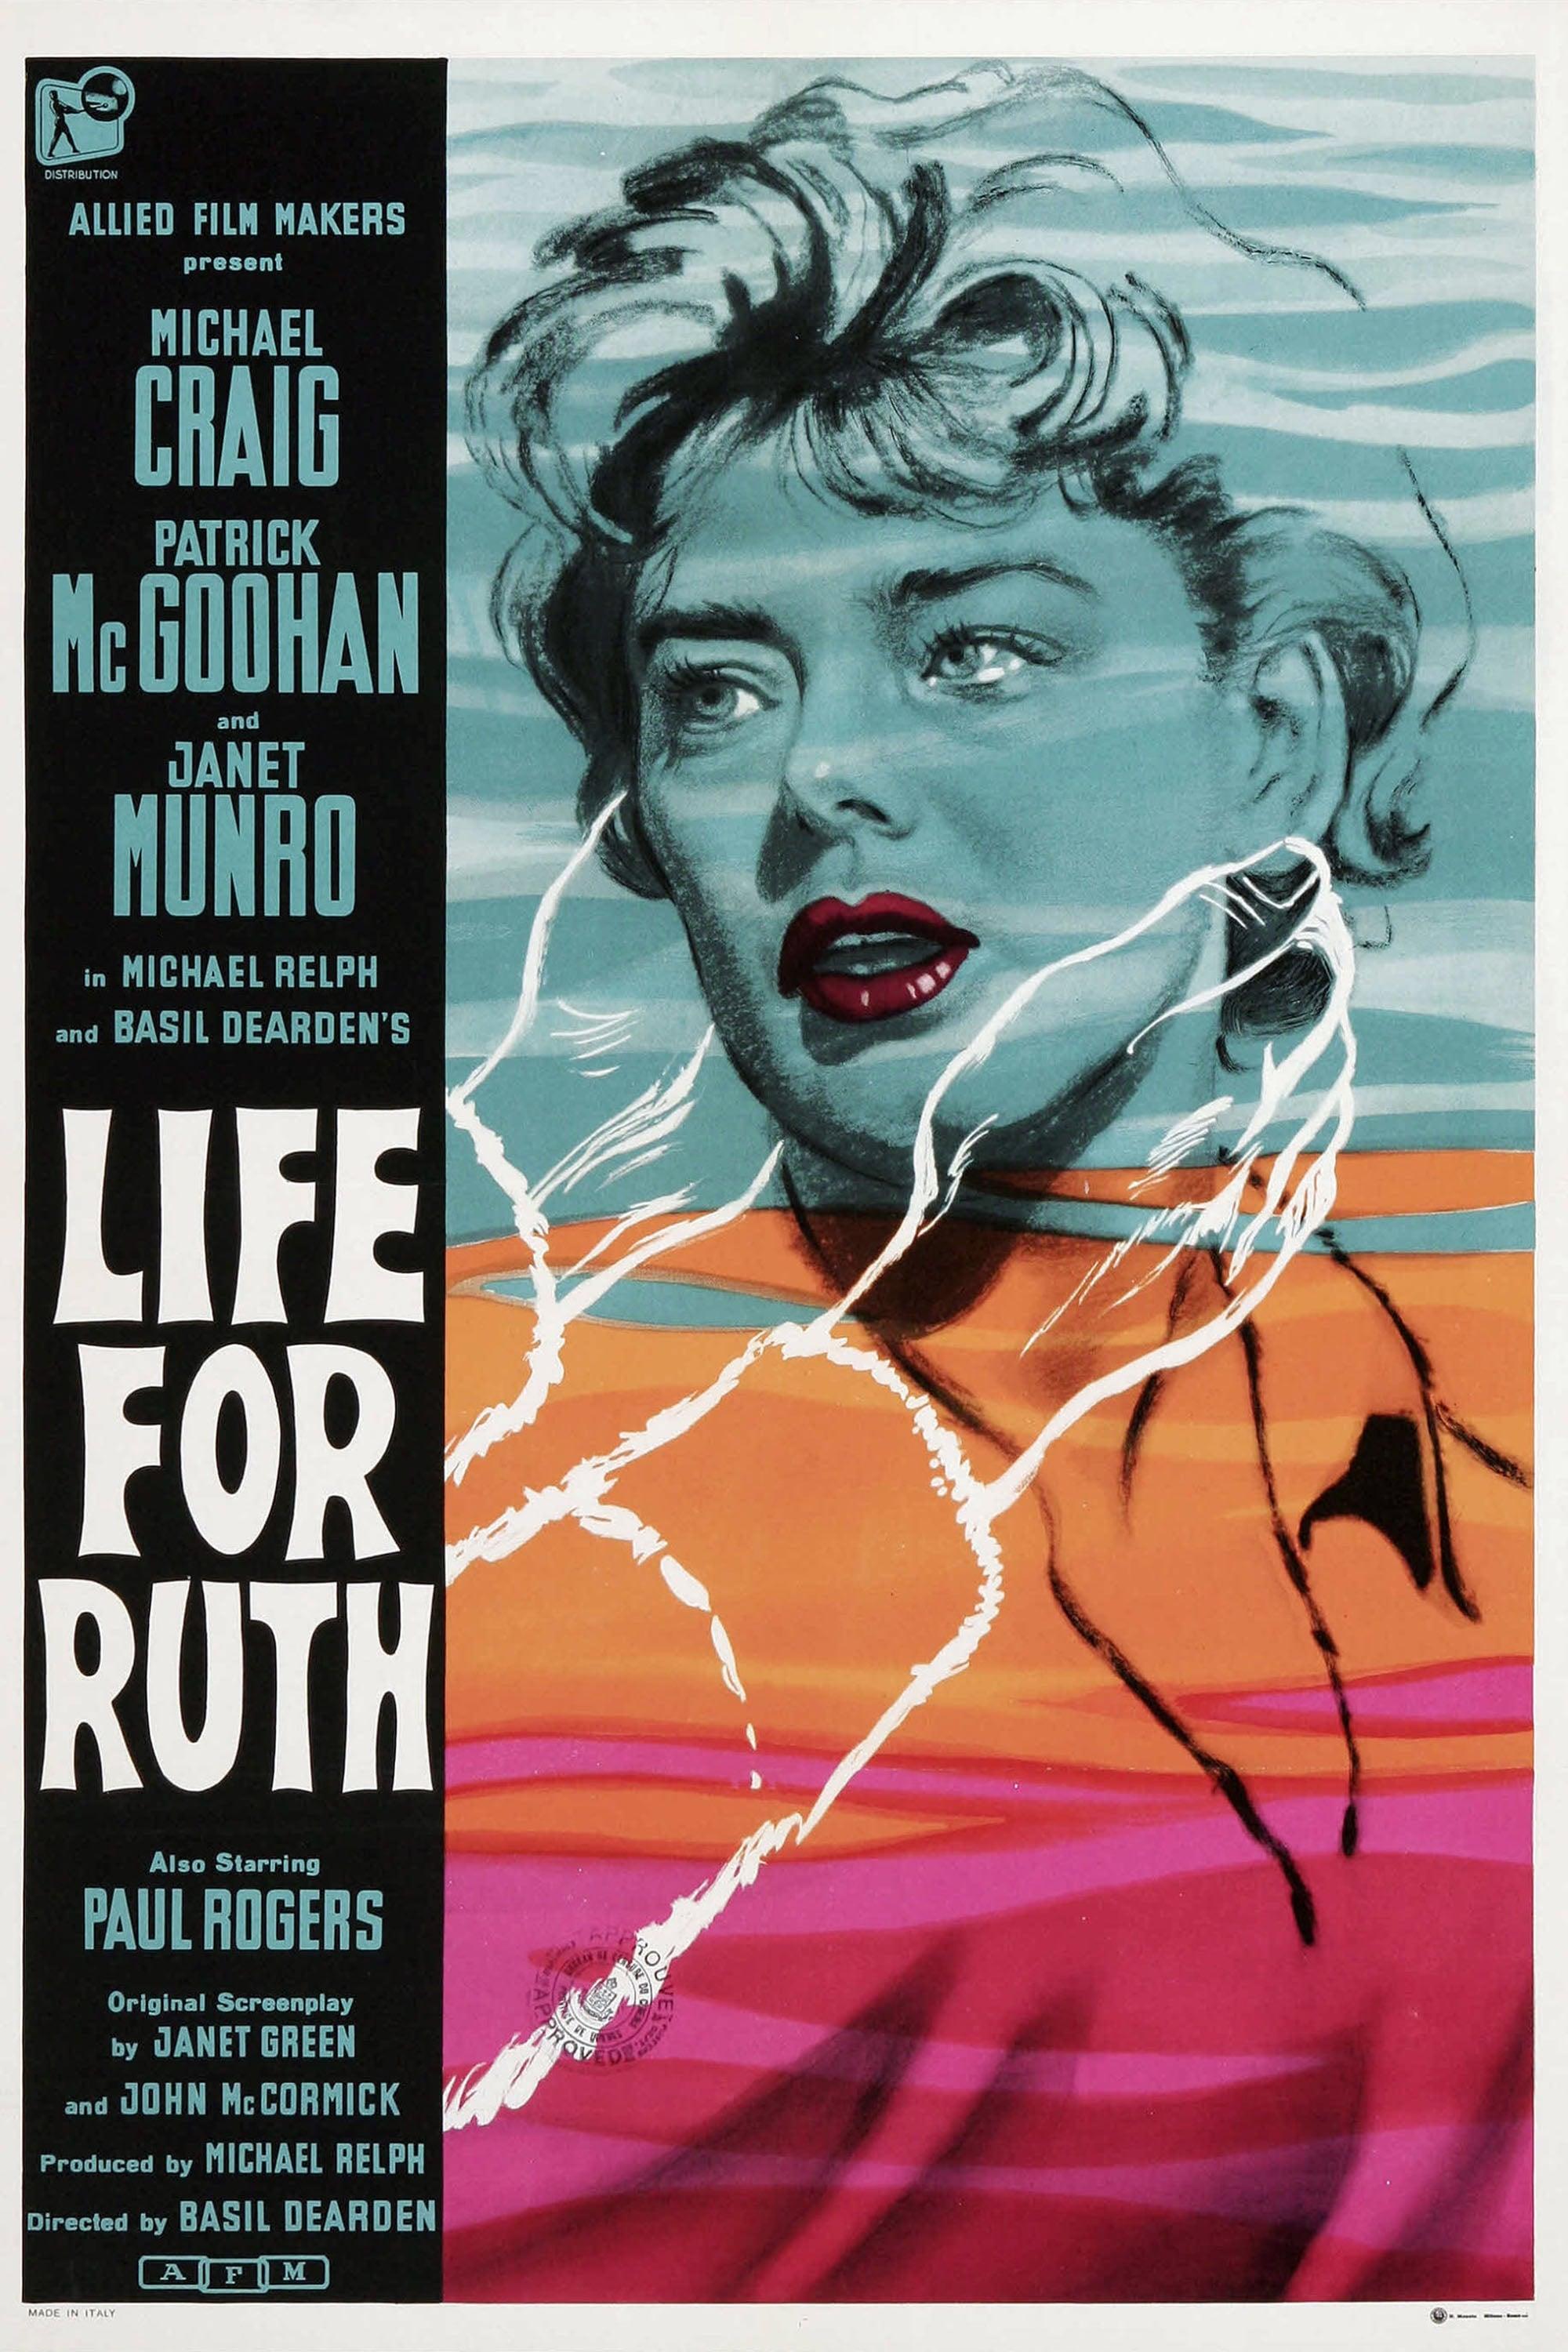 Life for Ruth poster